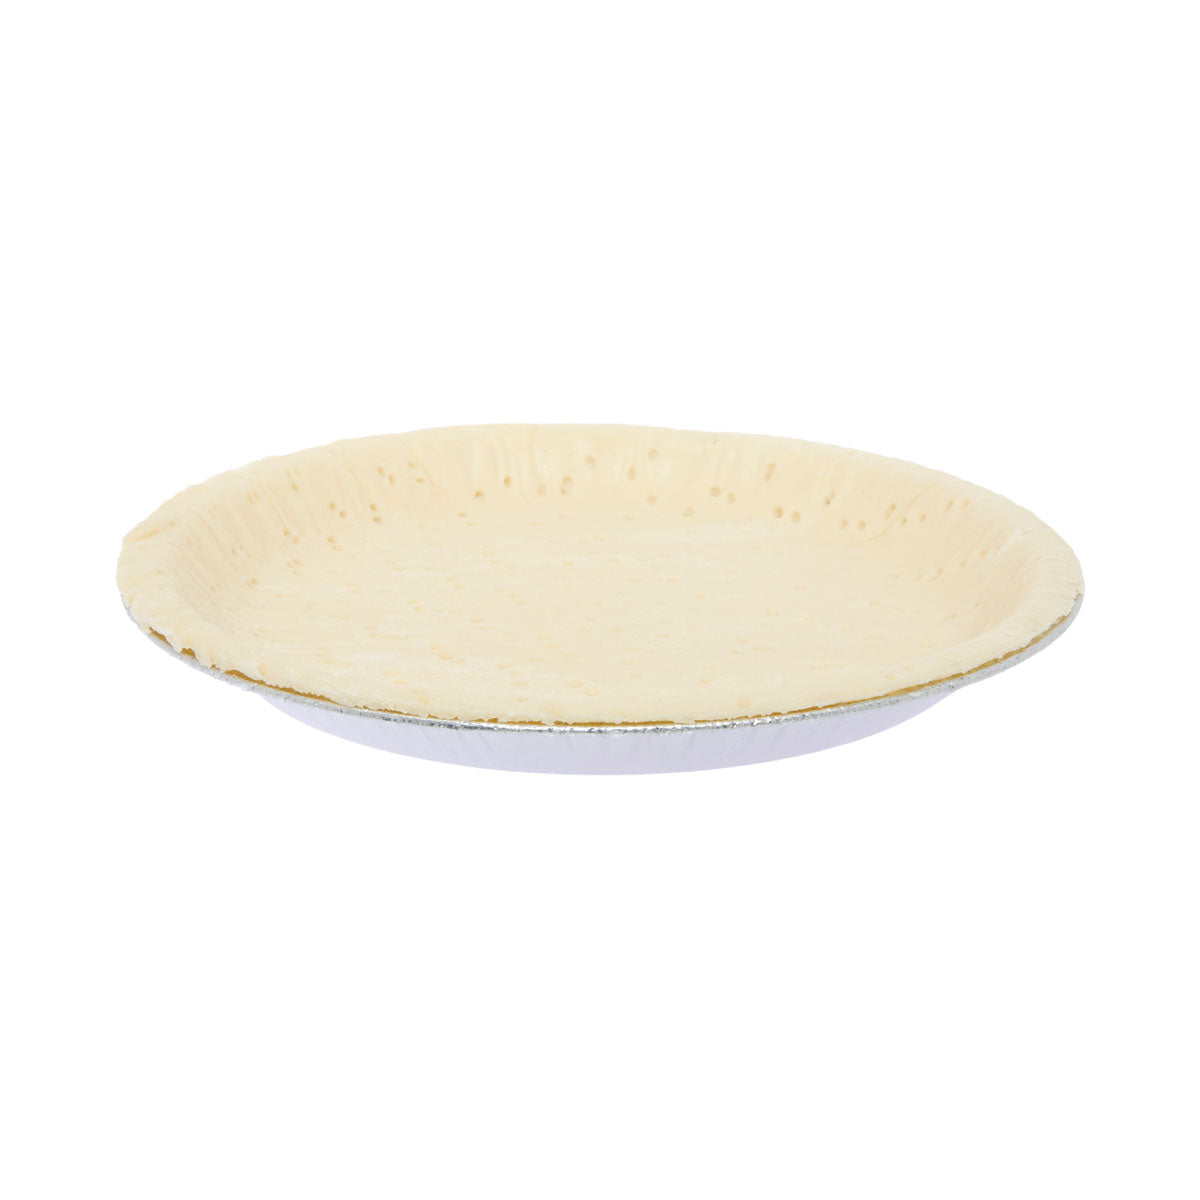 Dufour Pastry Kitchens Plant Based Pie Shells 10"